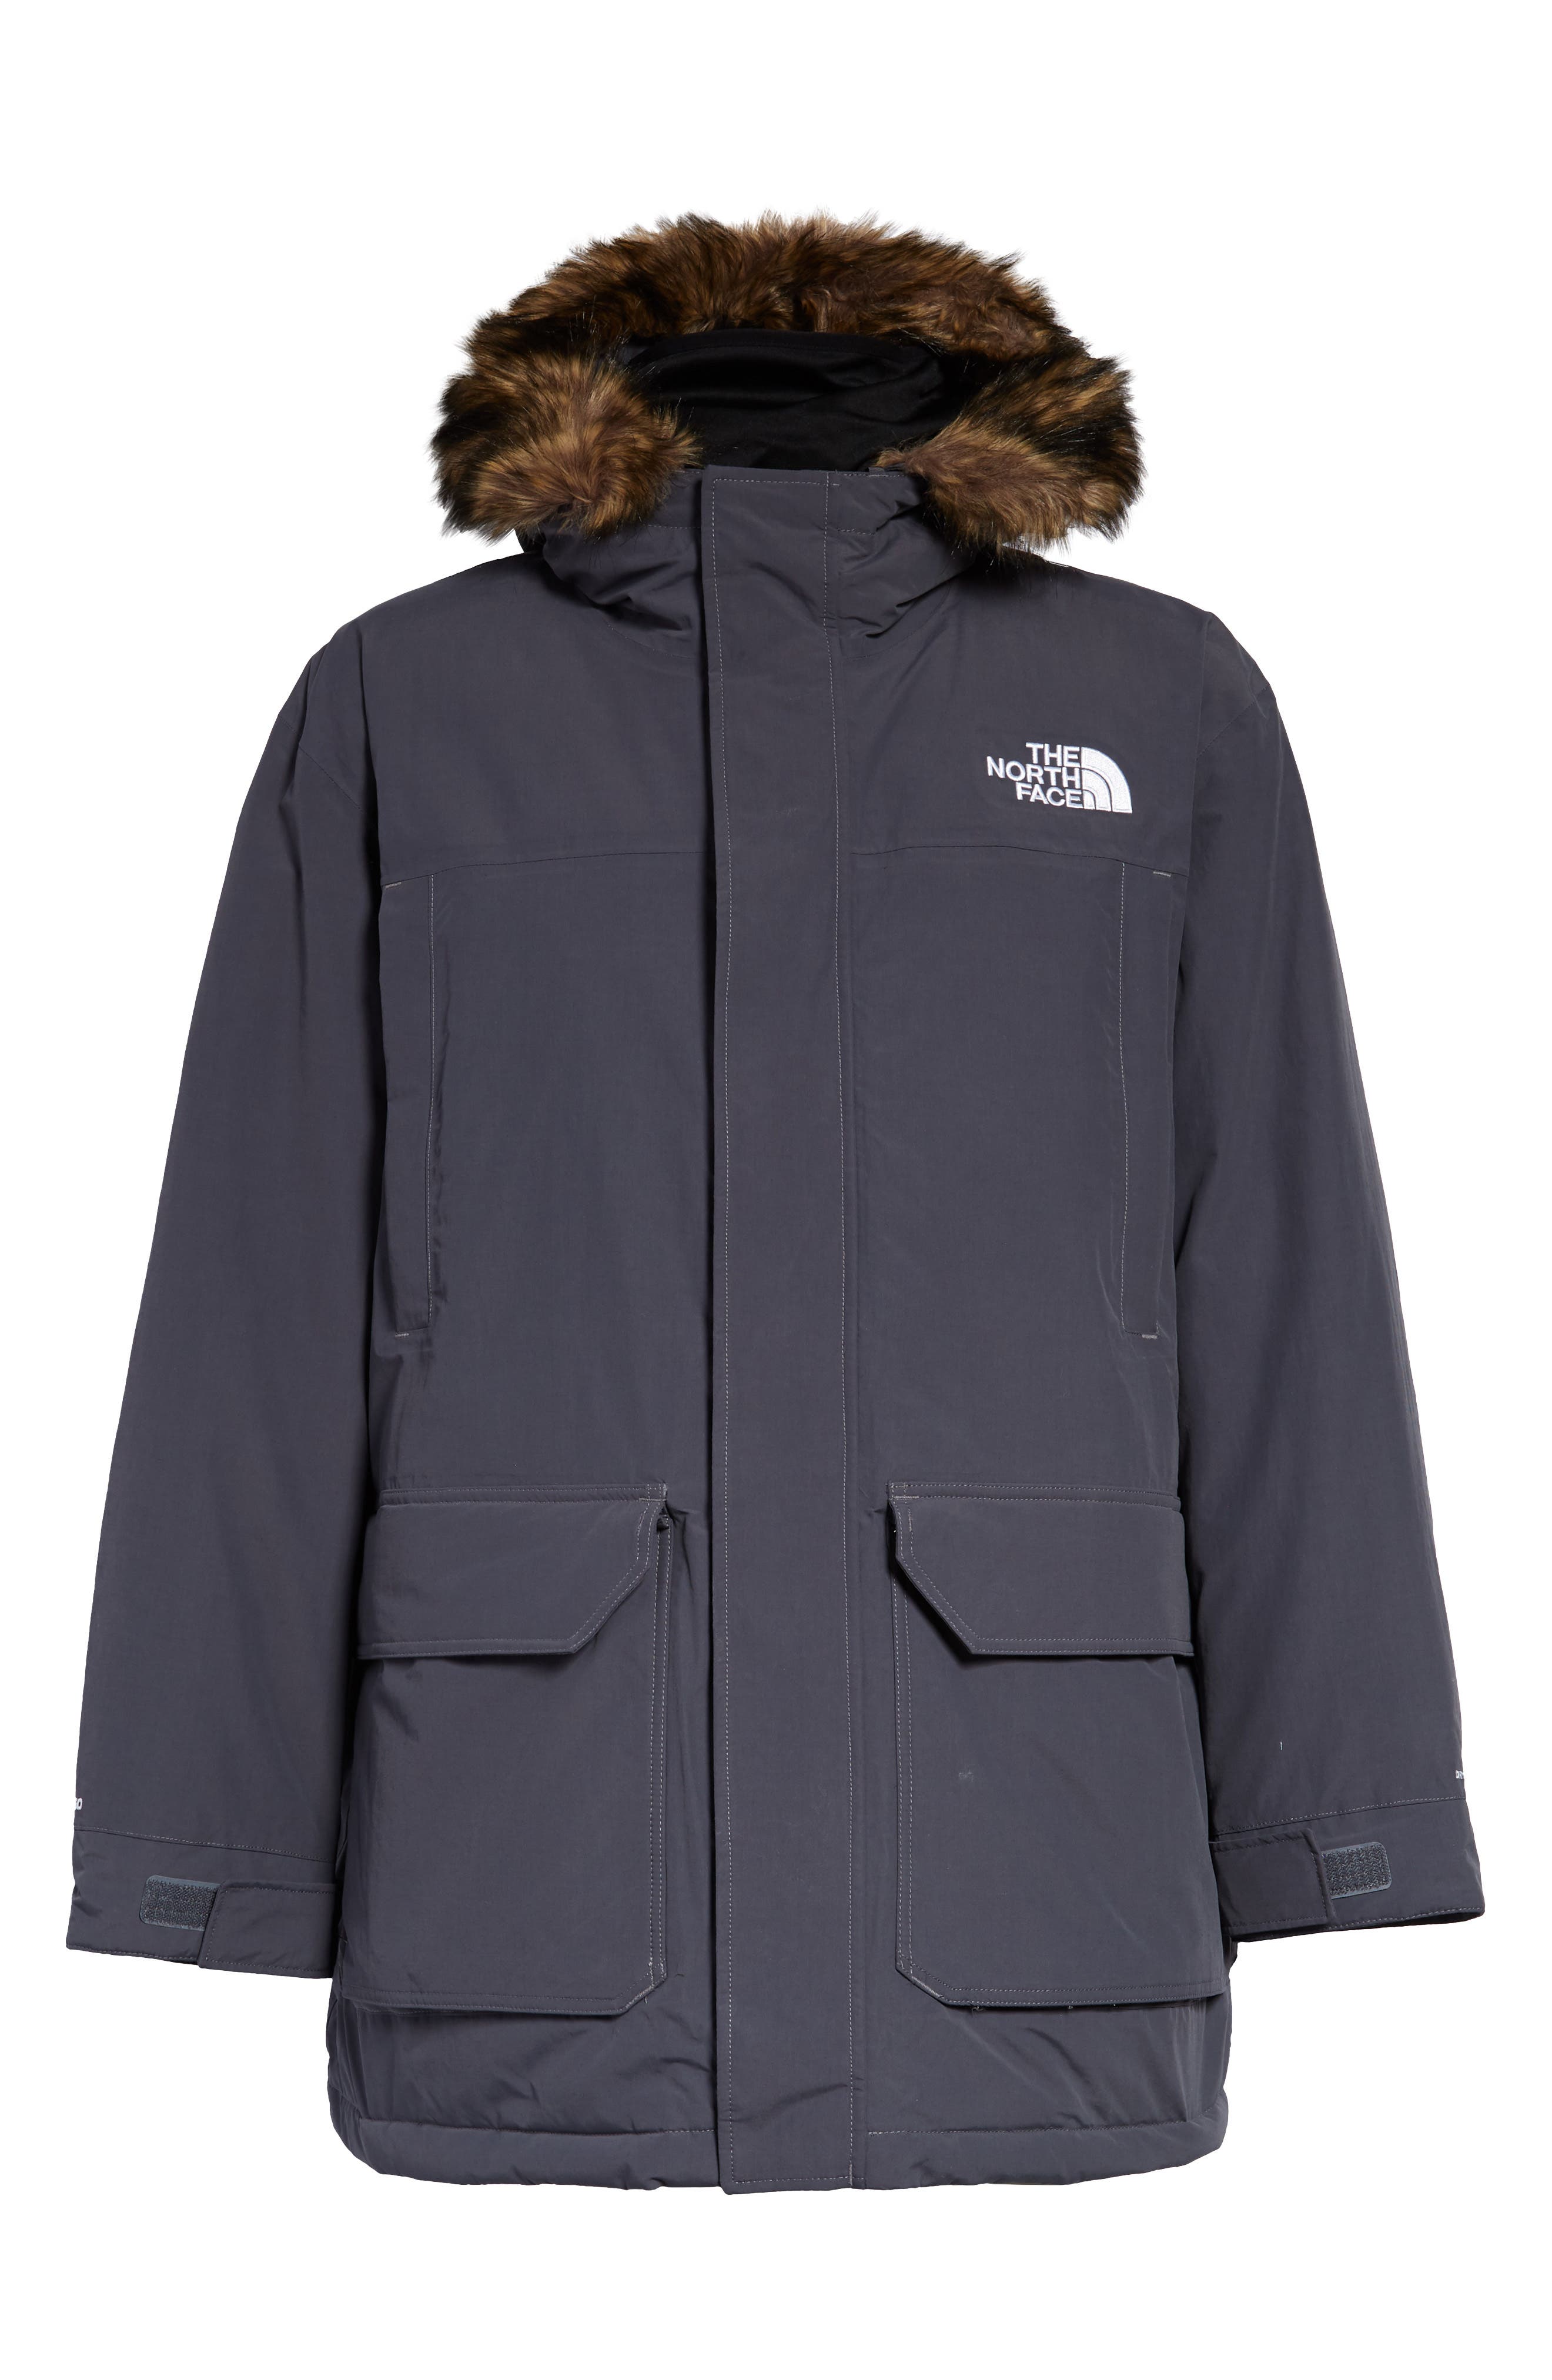 men's big and tall jackets north face